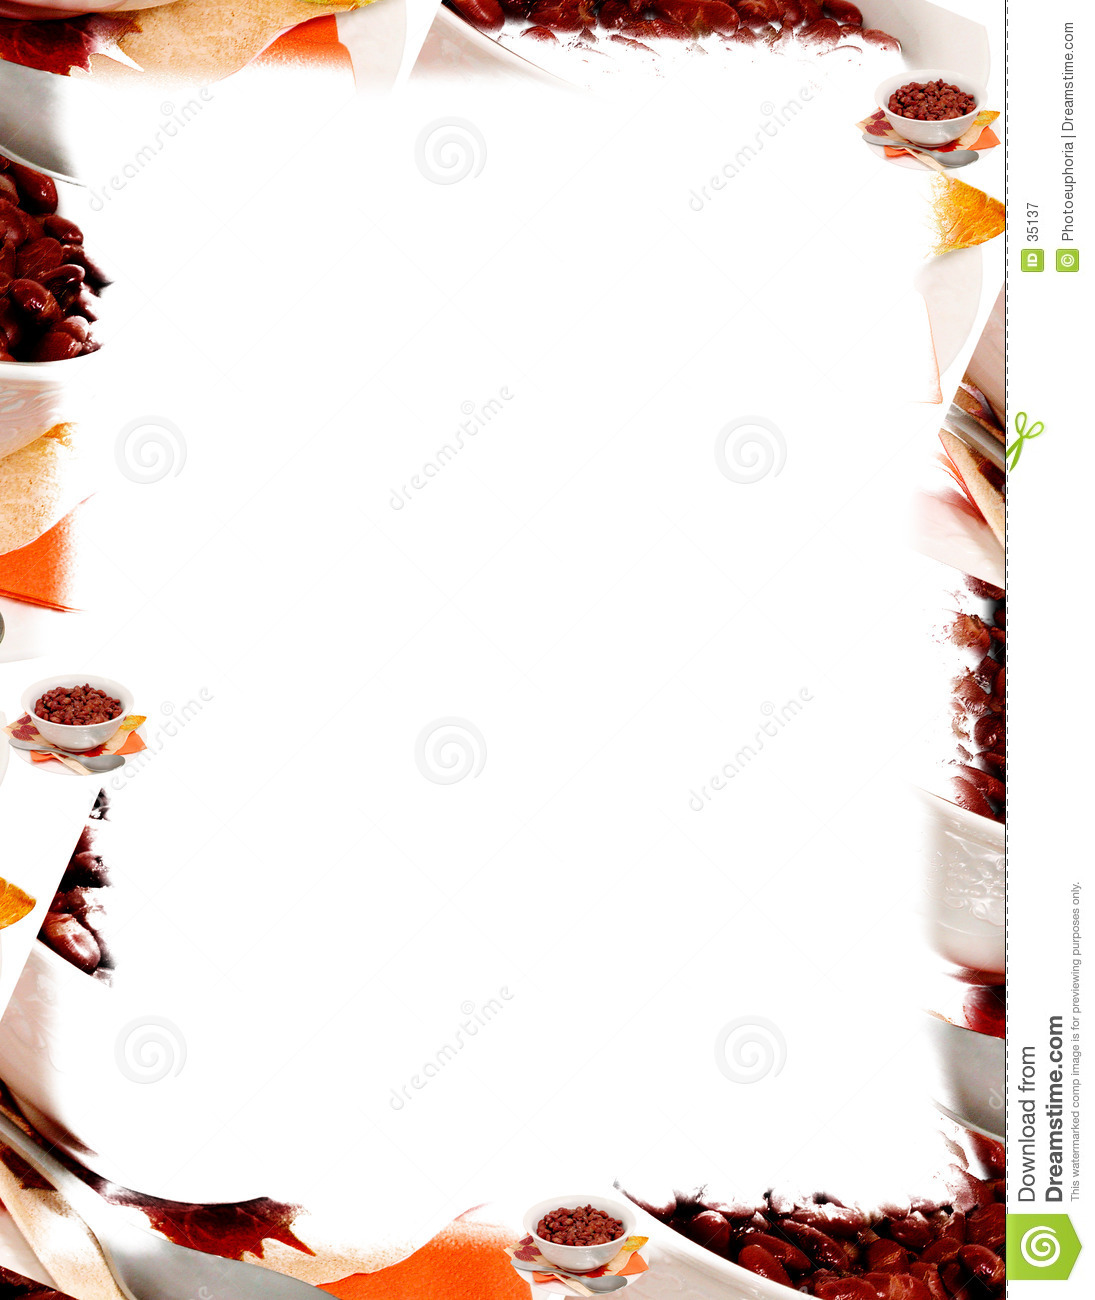 Baking Clipart Border Beautiful Border Created With